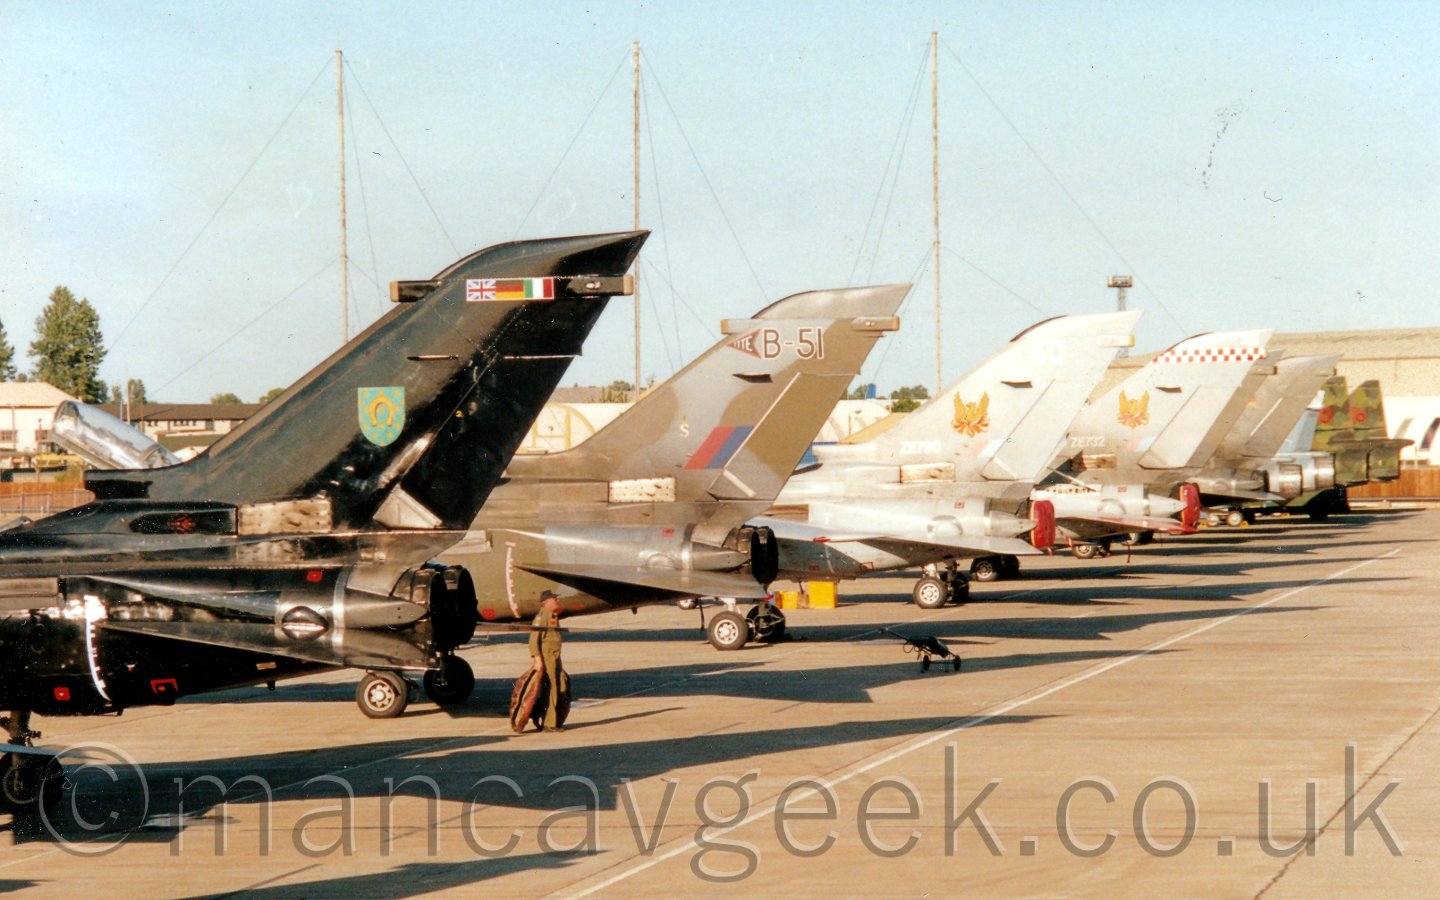 Side view of the tails of a lineup of 8 military fighter jets, parked facing to the left, under a pale blue sky.